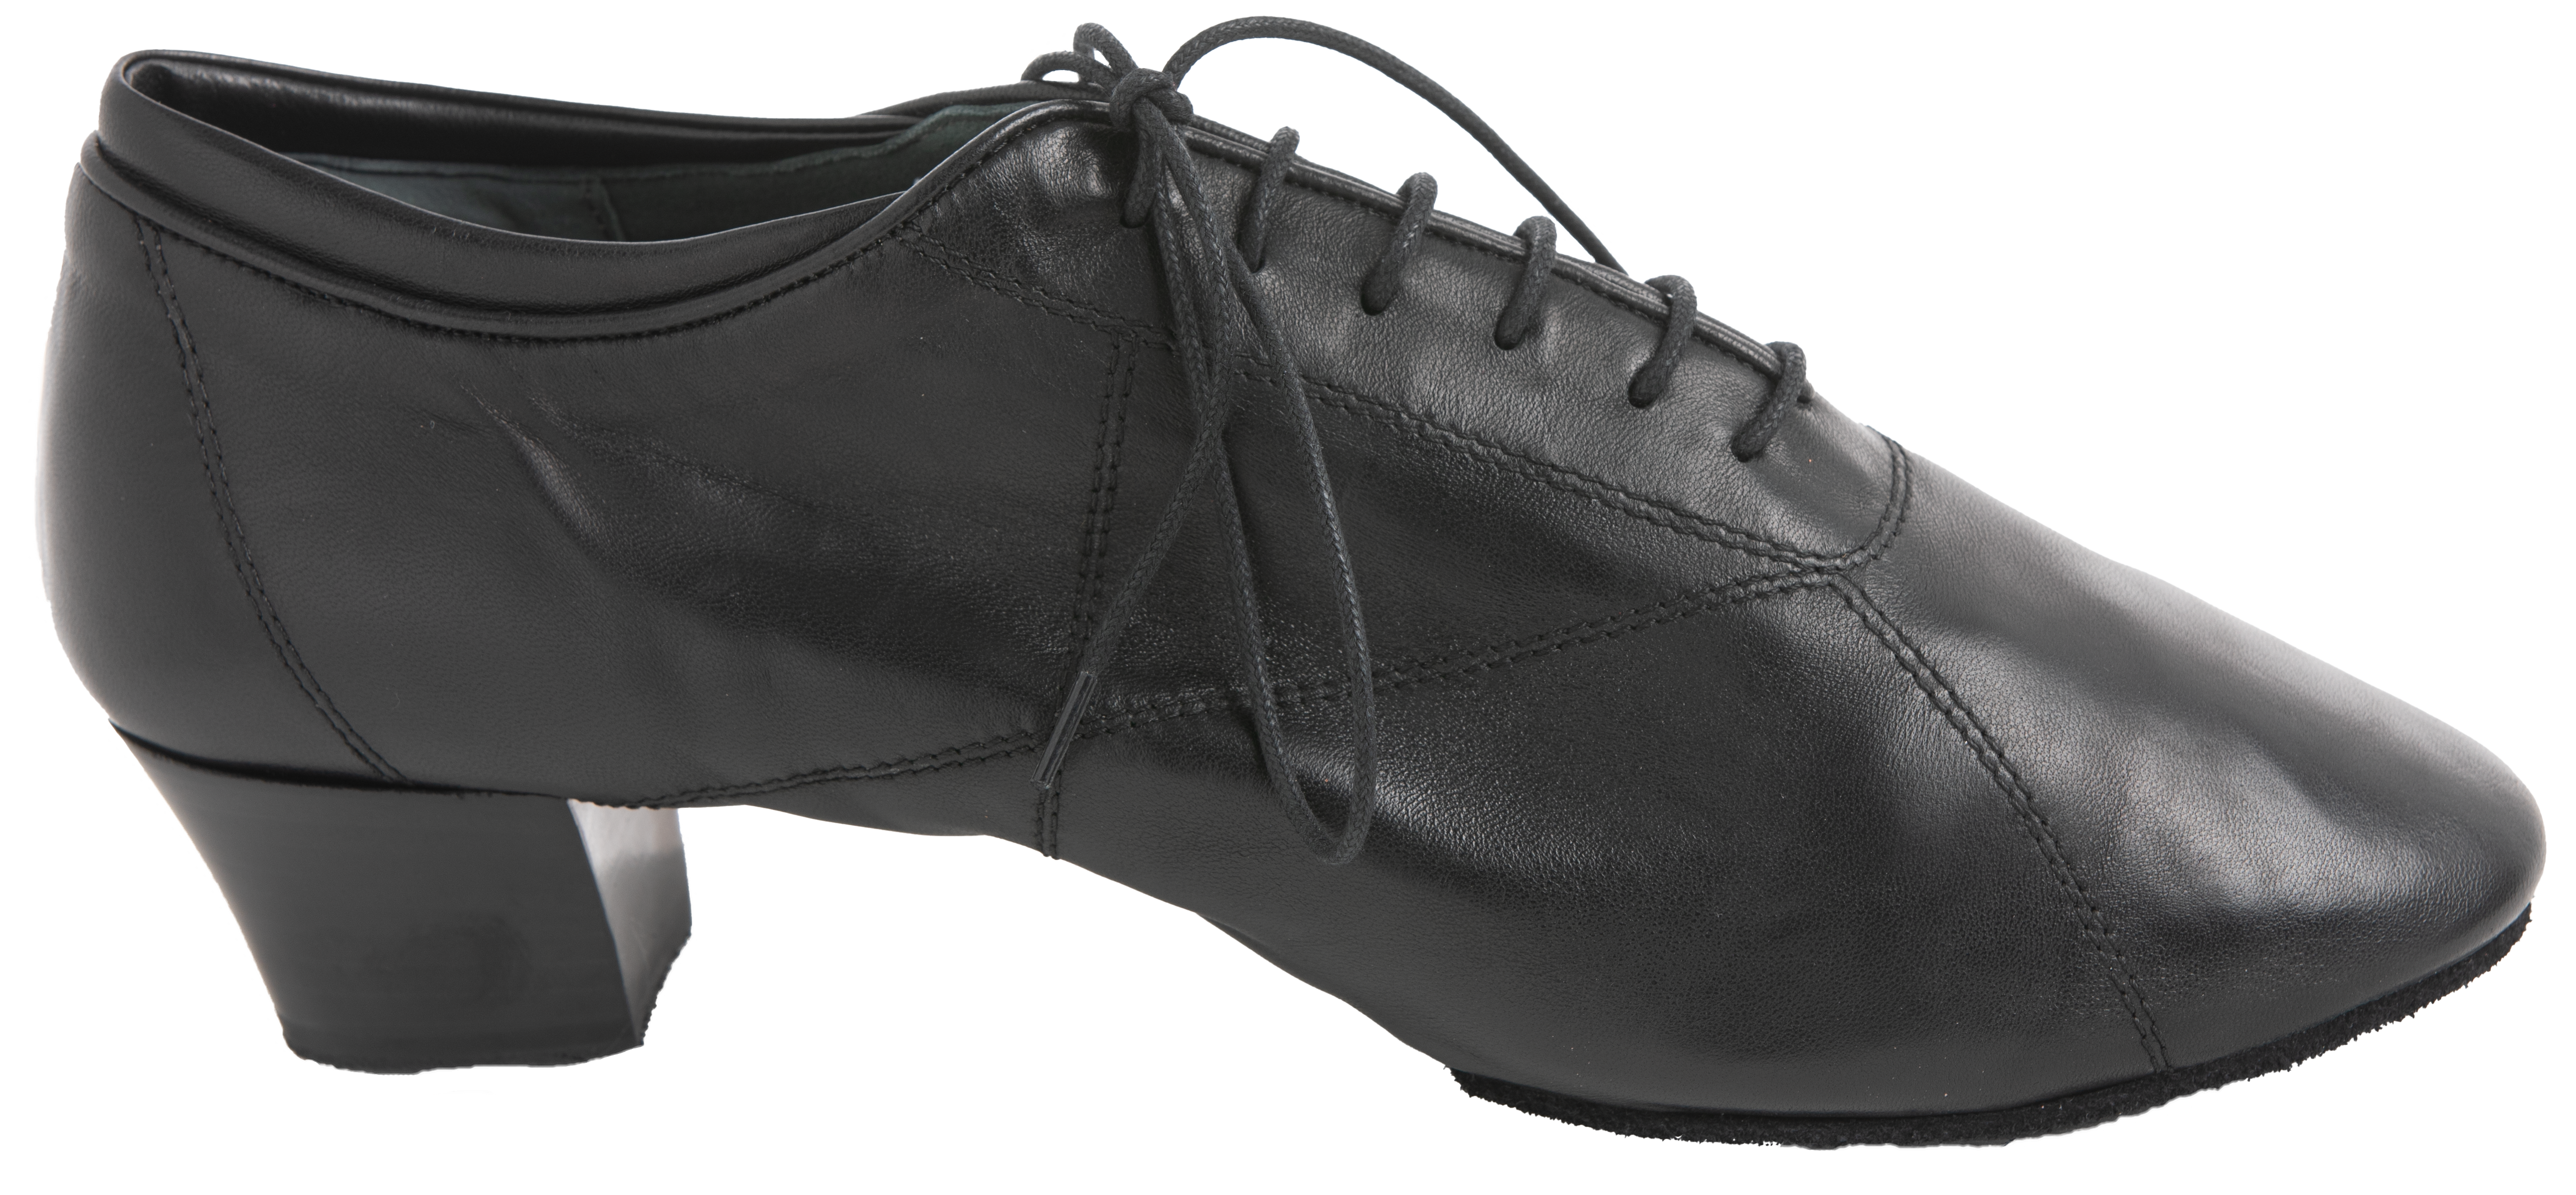 Roma Mens Latin Dance Shoes Leather with cotton twill laces - side view 